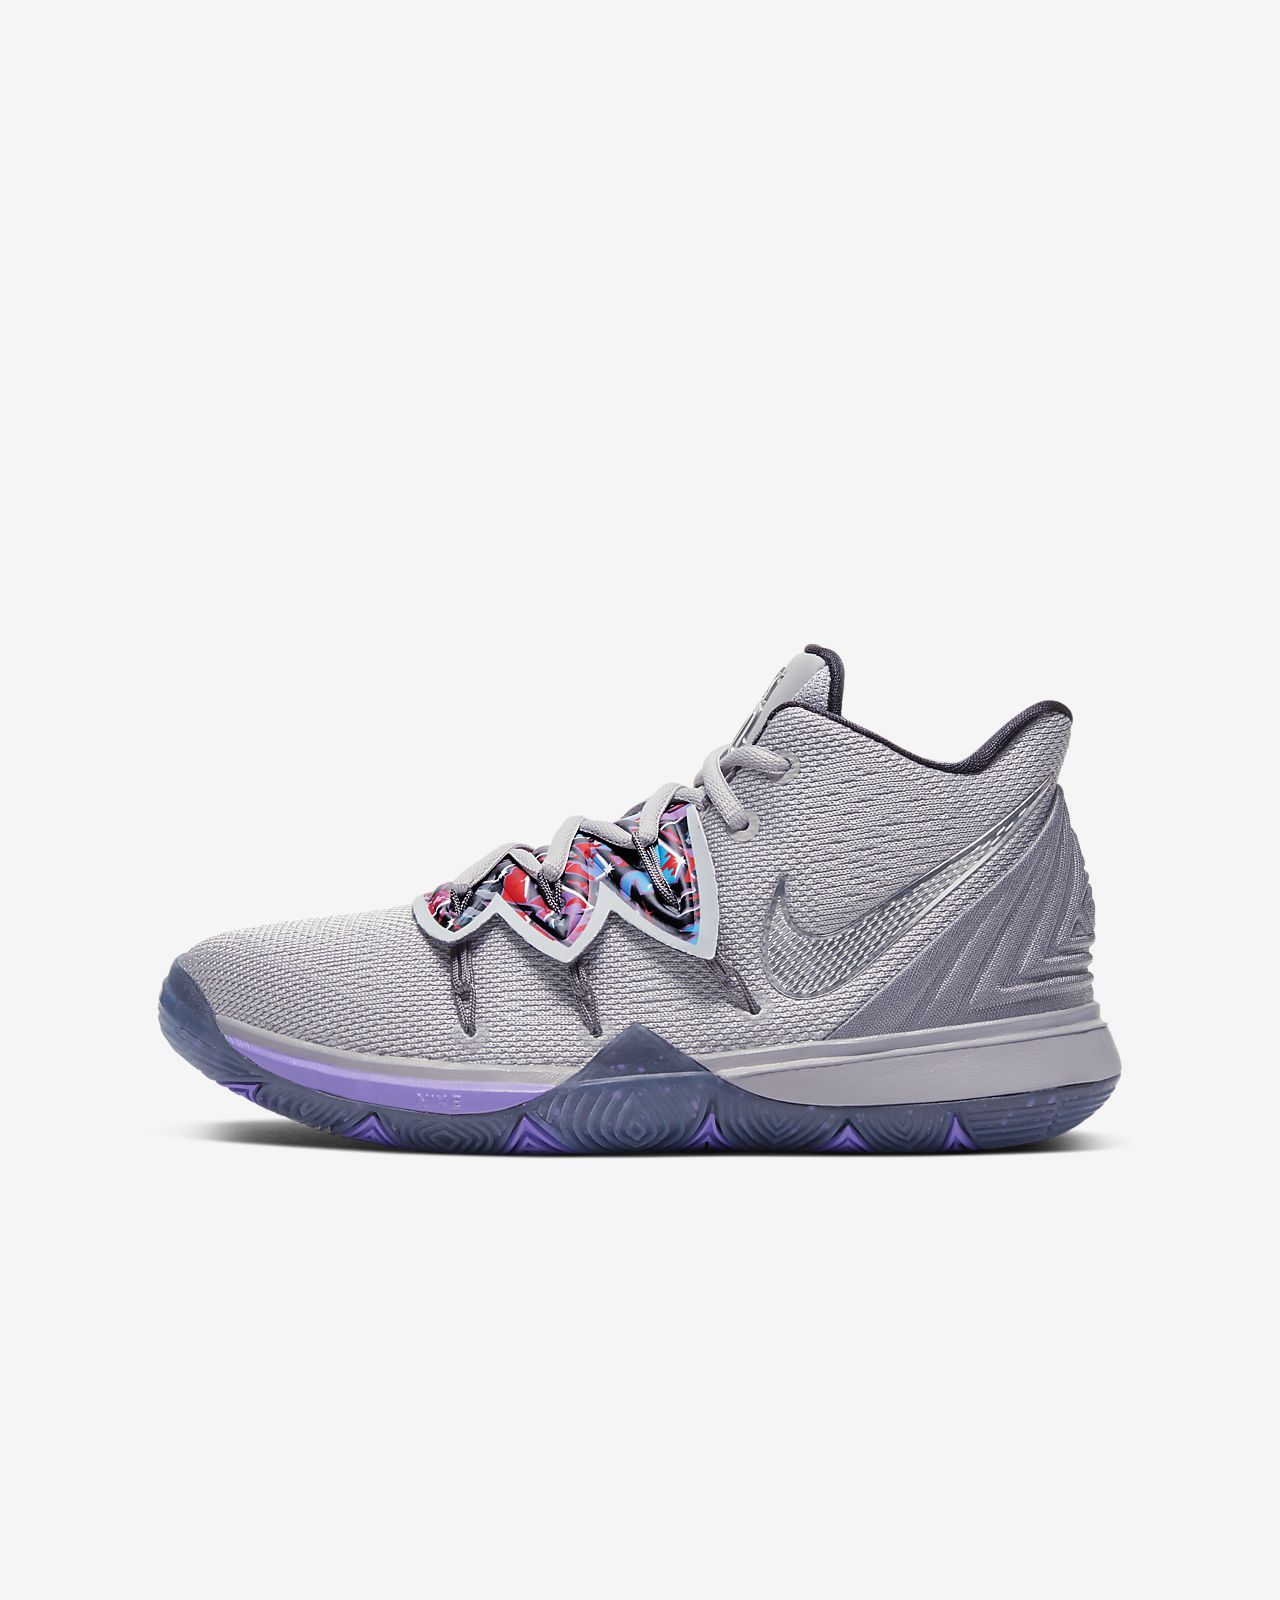 kyrie 5 shoes kids